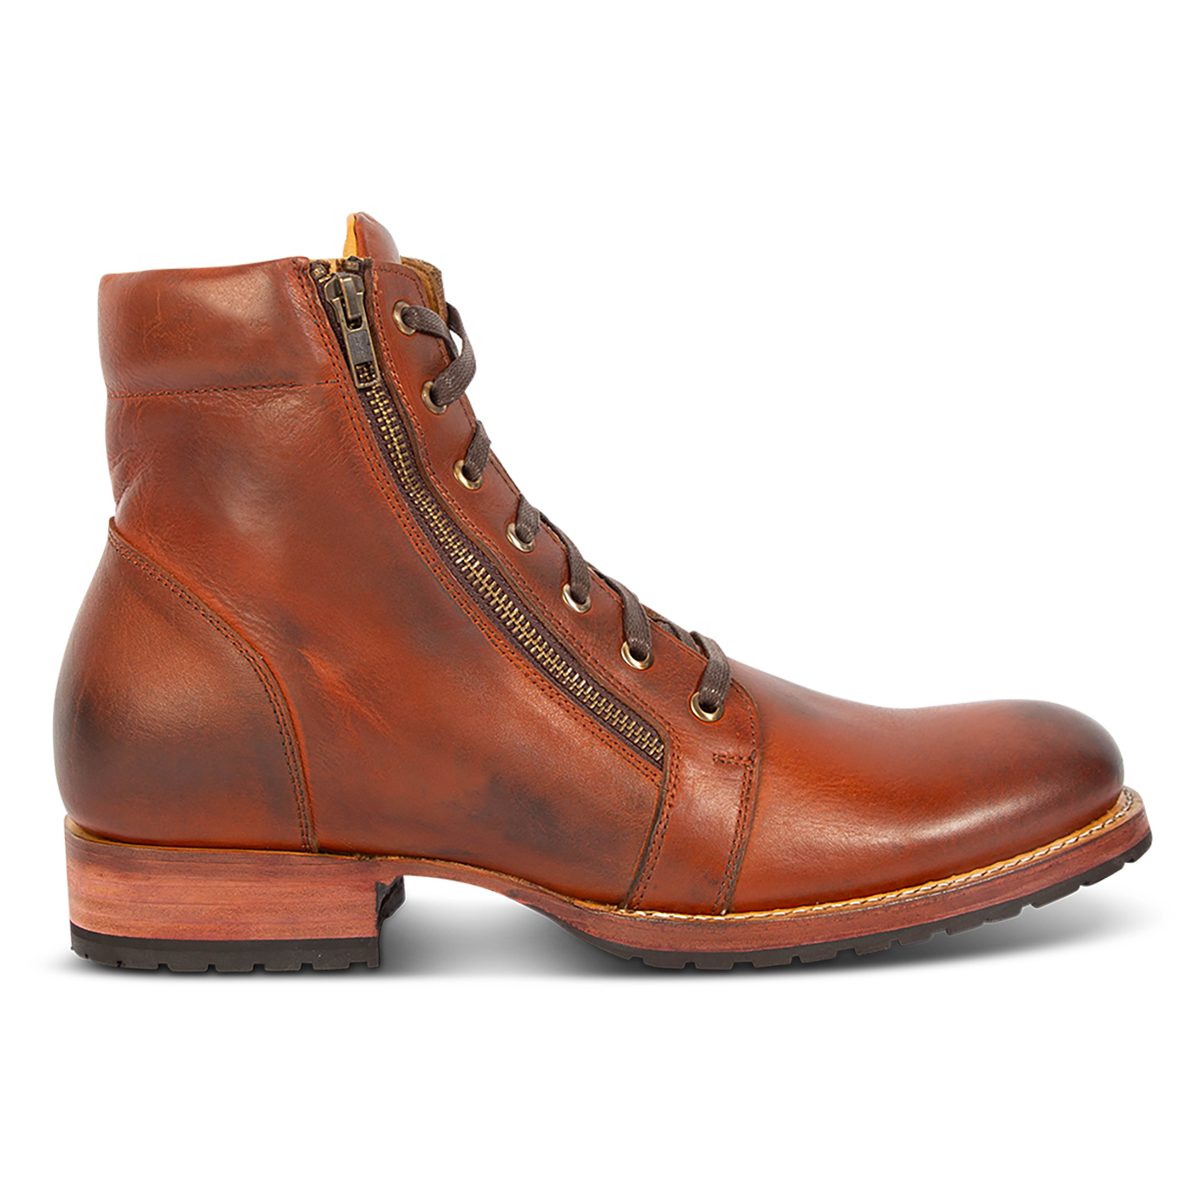 FREEBIRD men's Chevy rust leather boot with Goodyear welt and rubber tread sole, double paired zip closures and adjustable front lacing